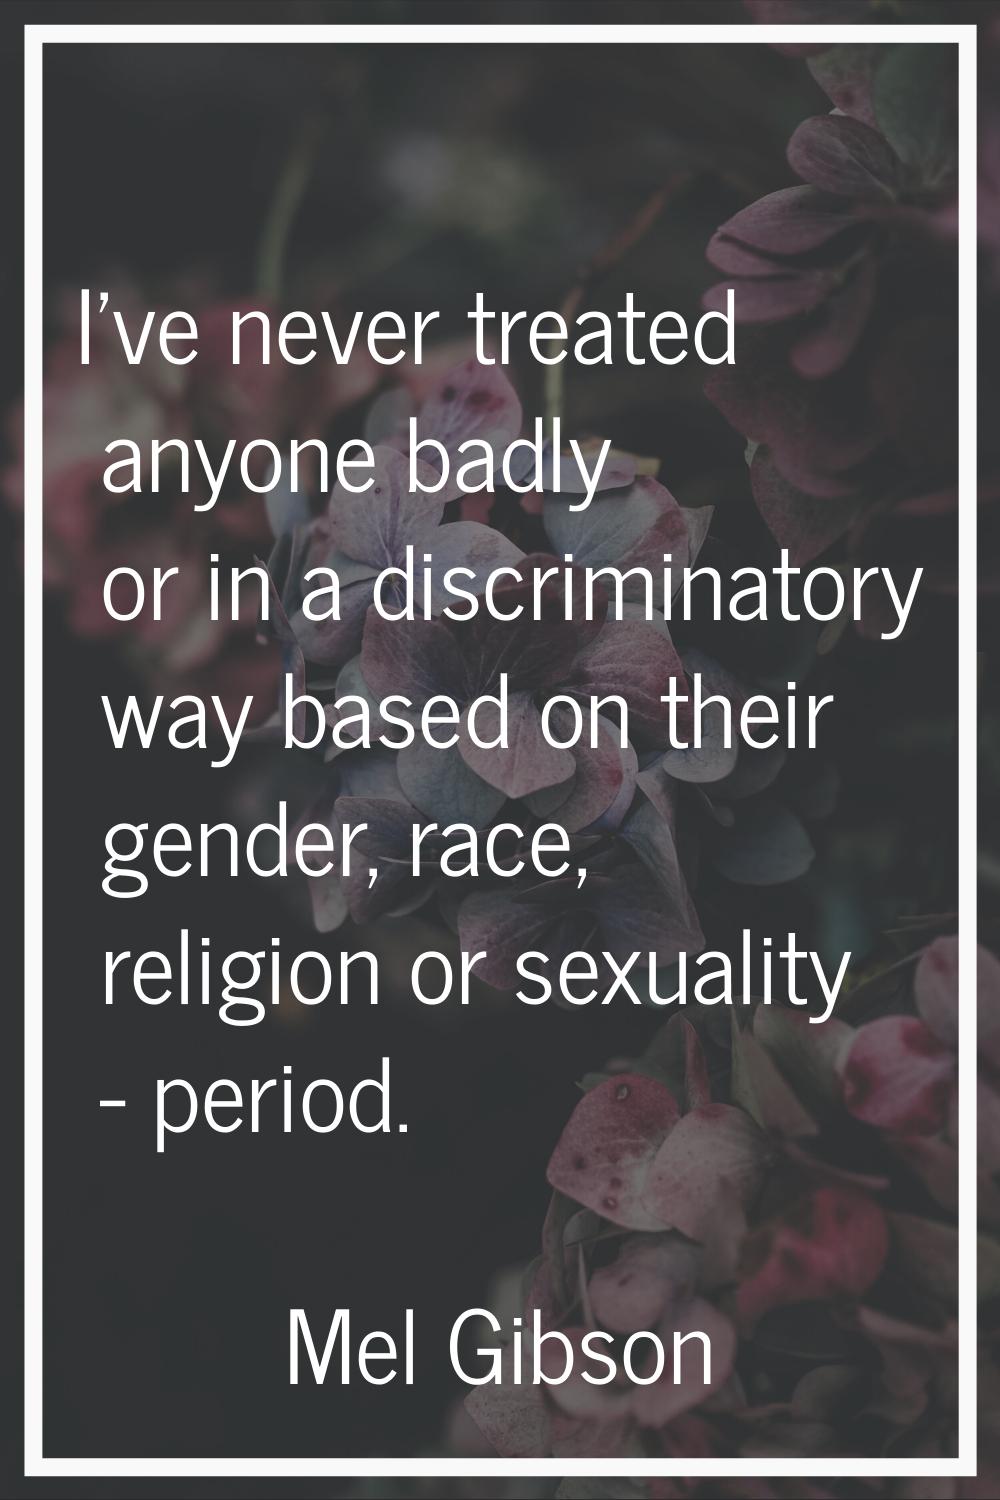 I've never treated anyone badly or in a discriminatory way based on their gender, race, religion or